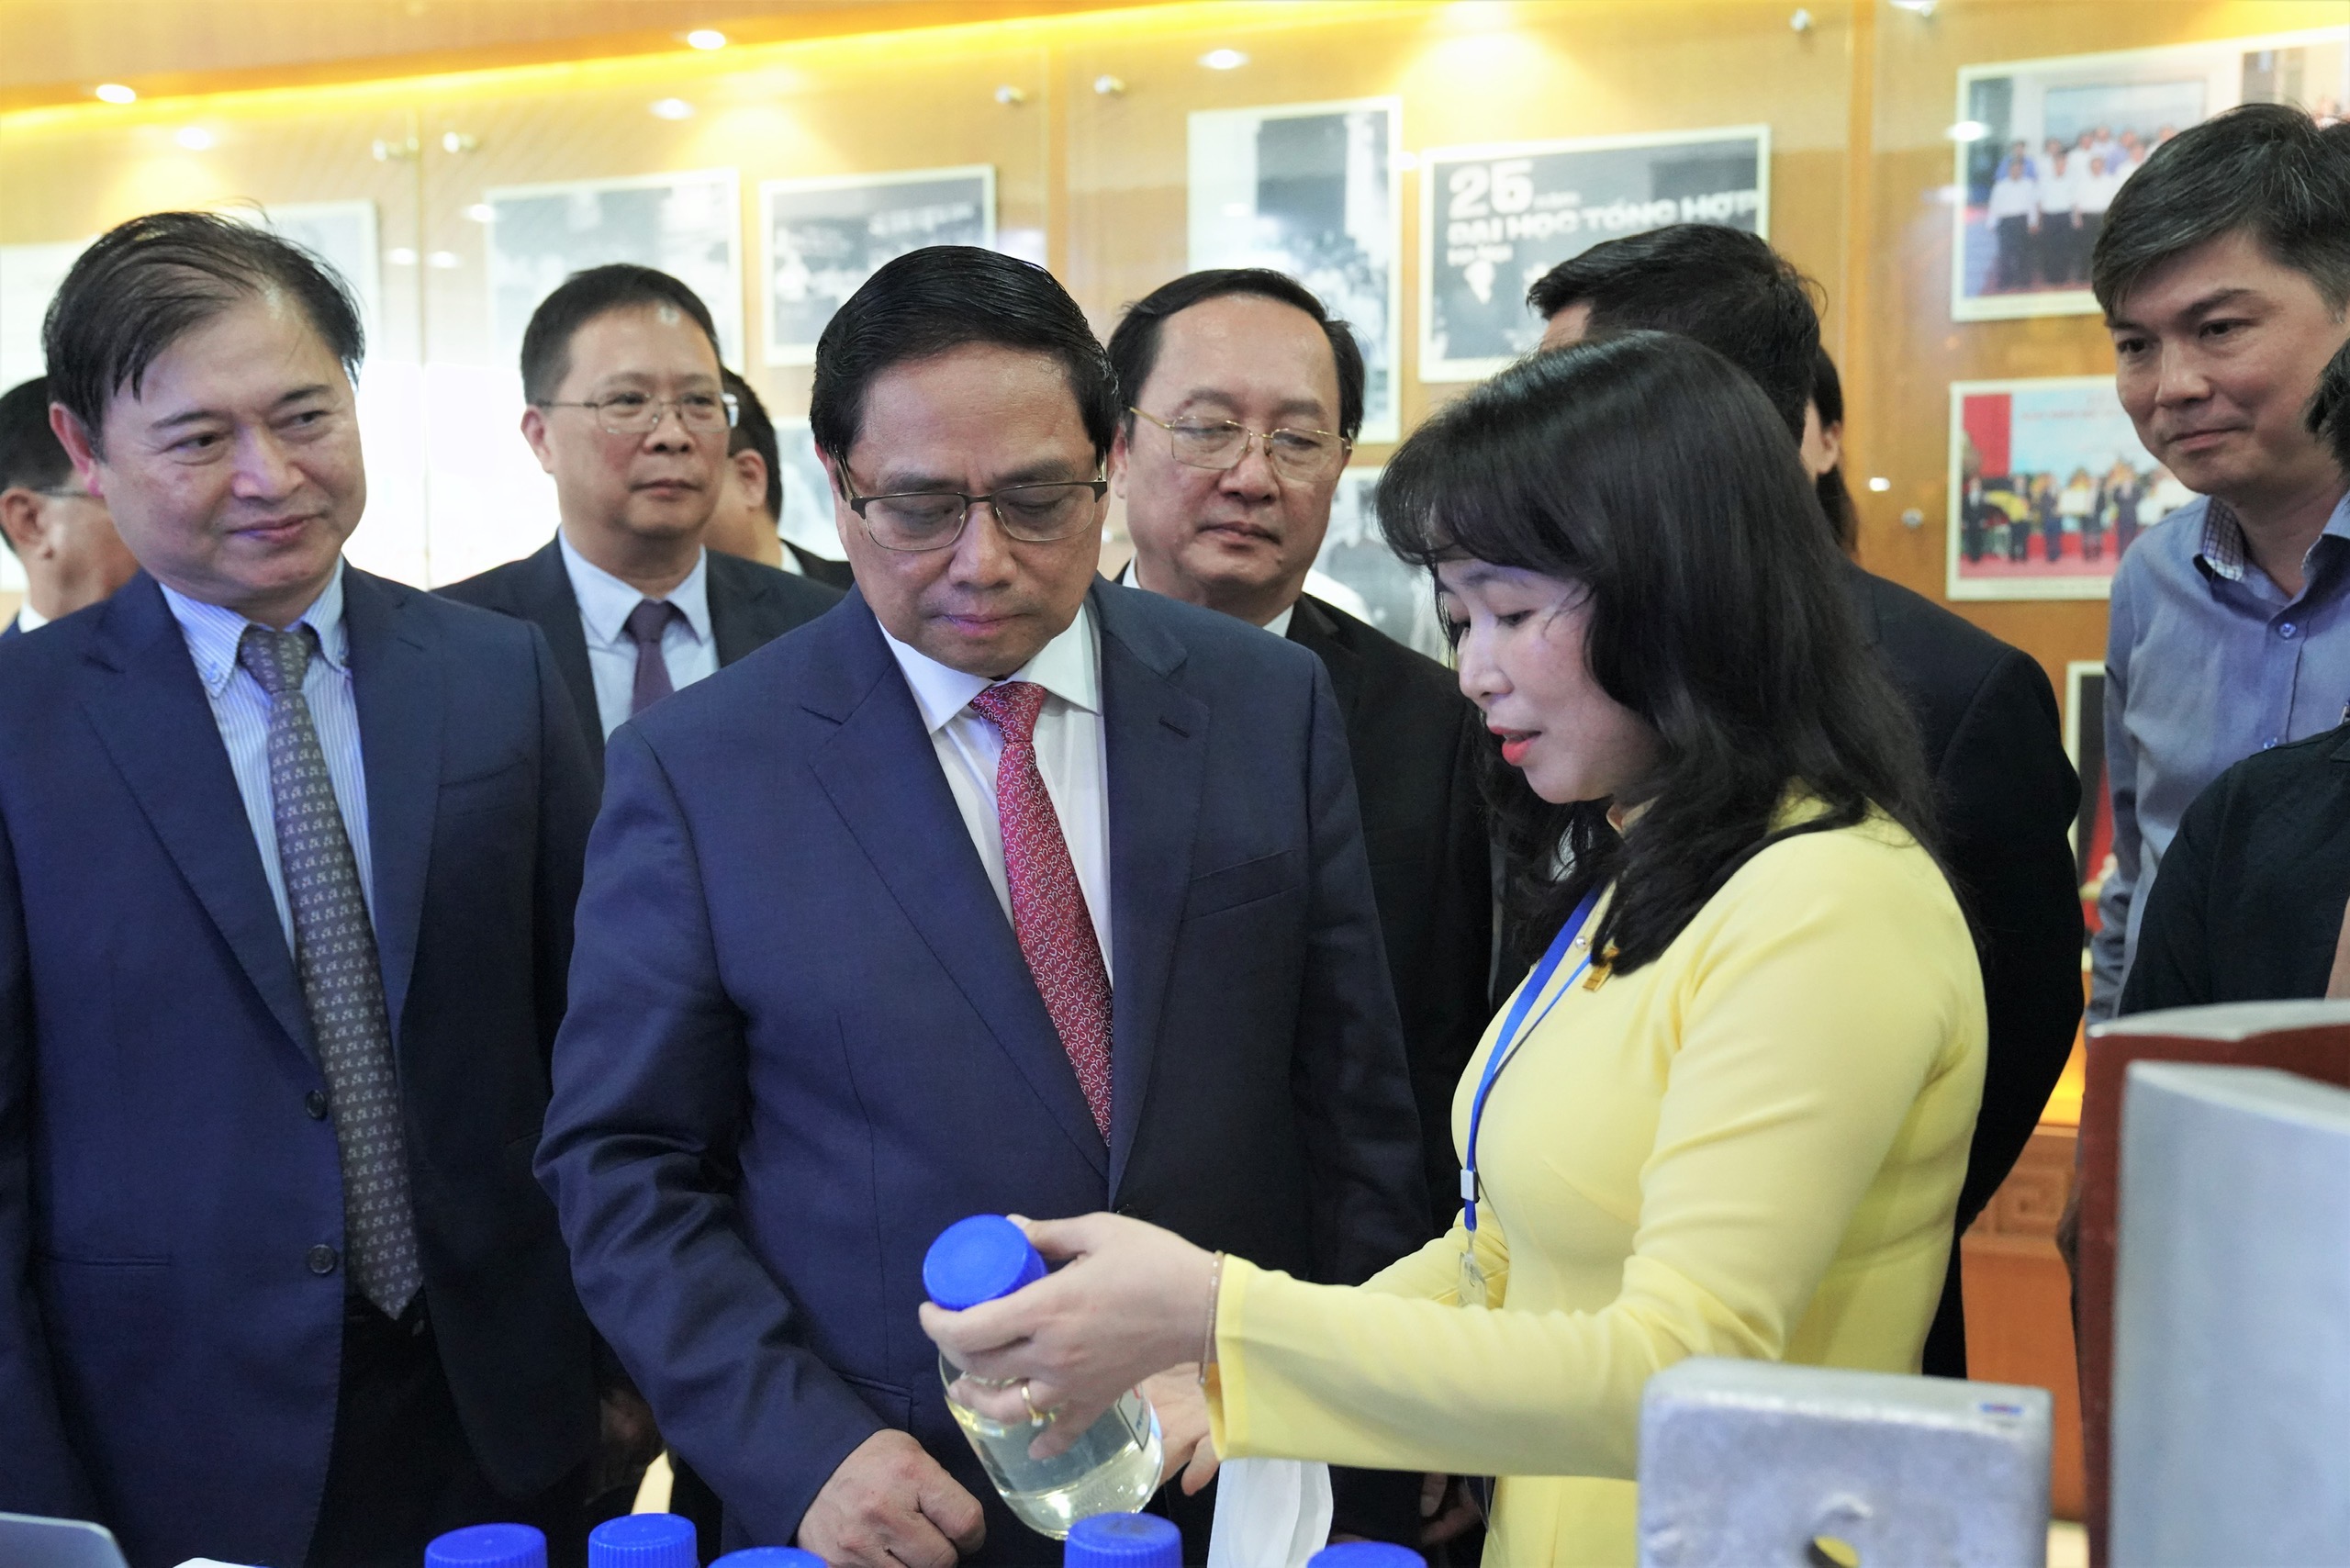 VPI focuses on developing an innovative ecosystem for Vietnam's oil and gas industry